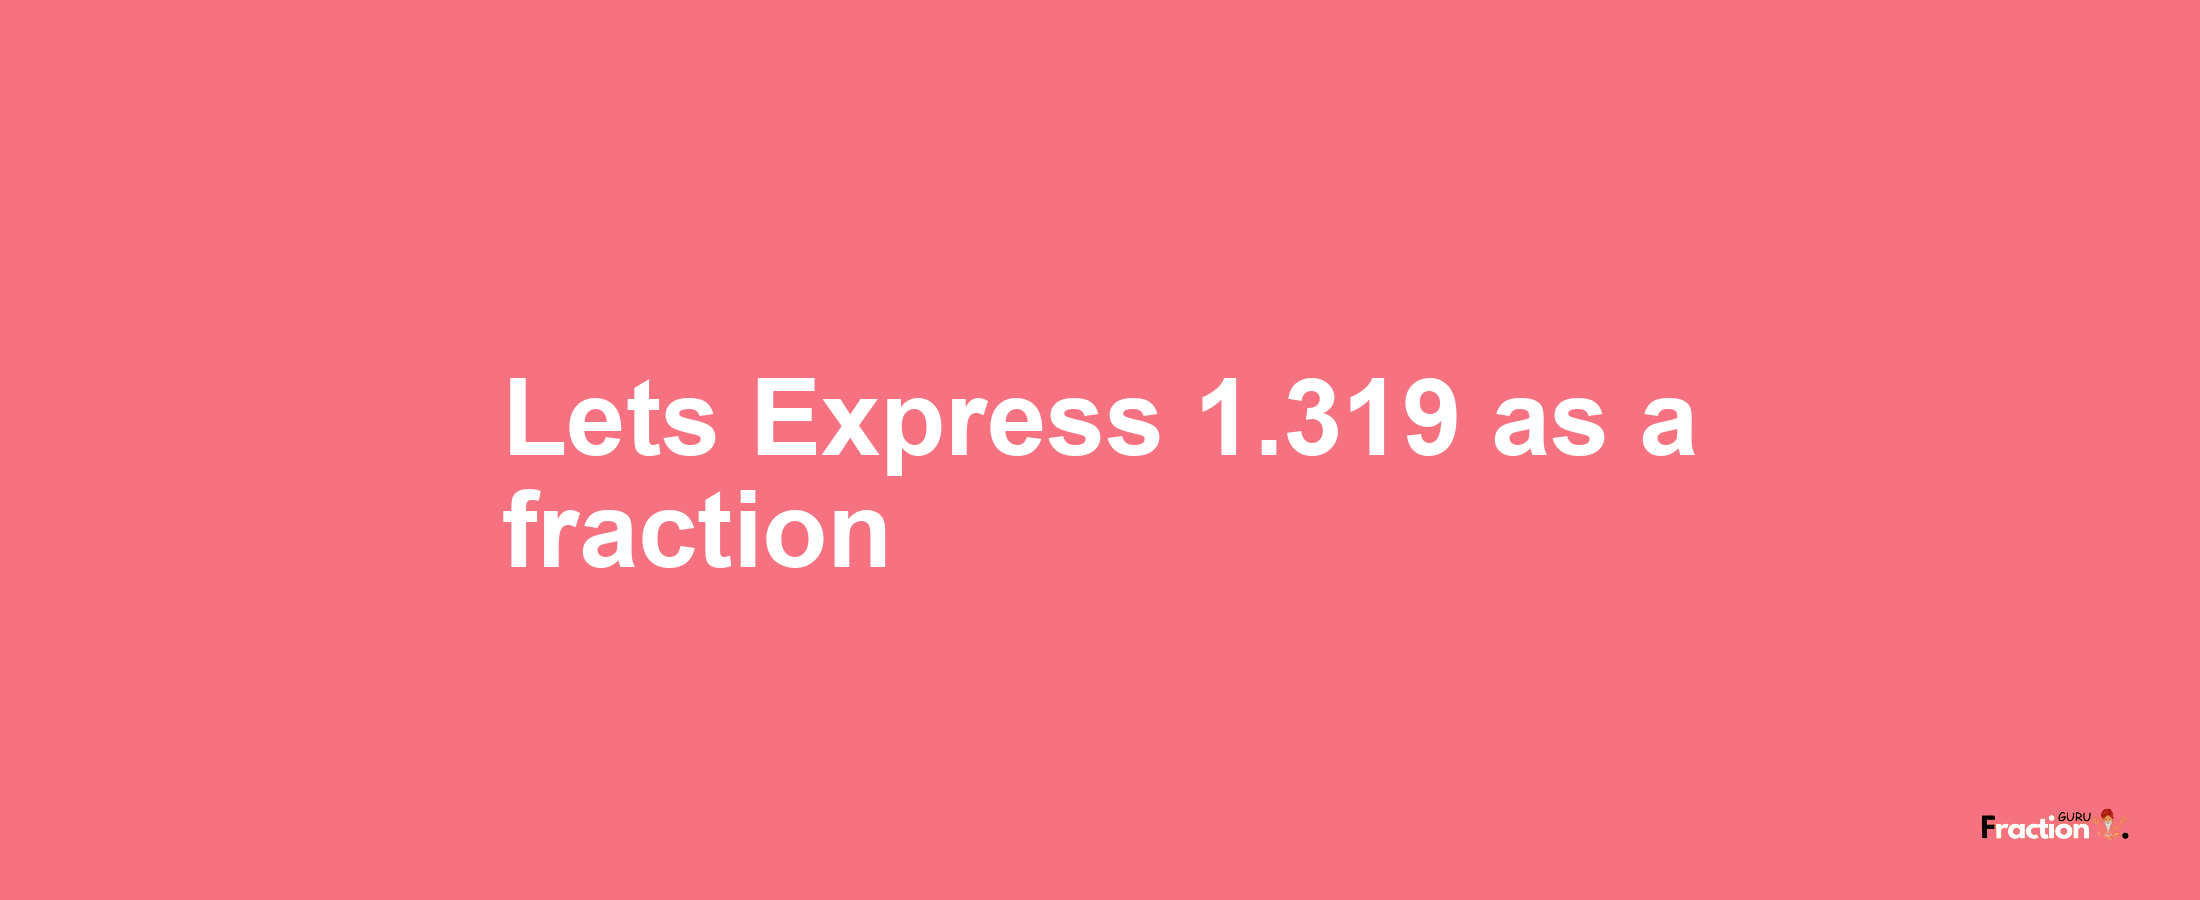 Lets Express 1.319 as afraction